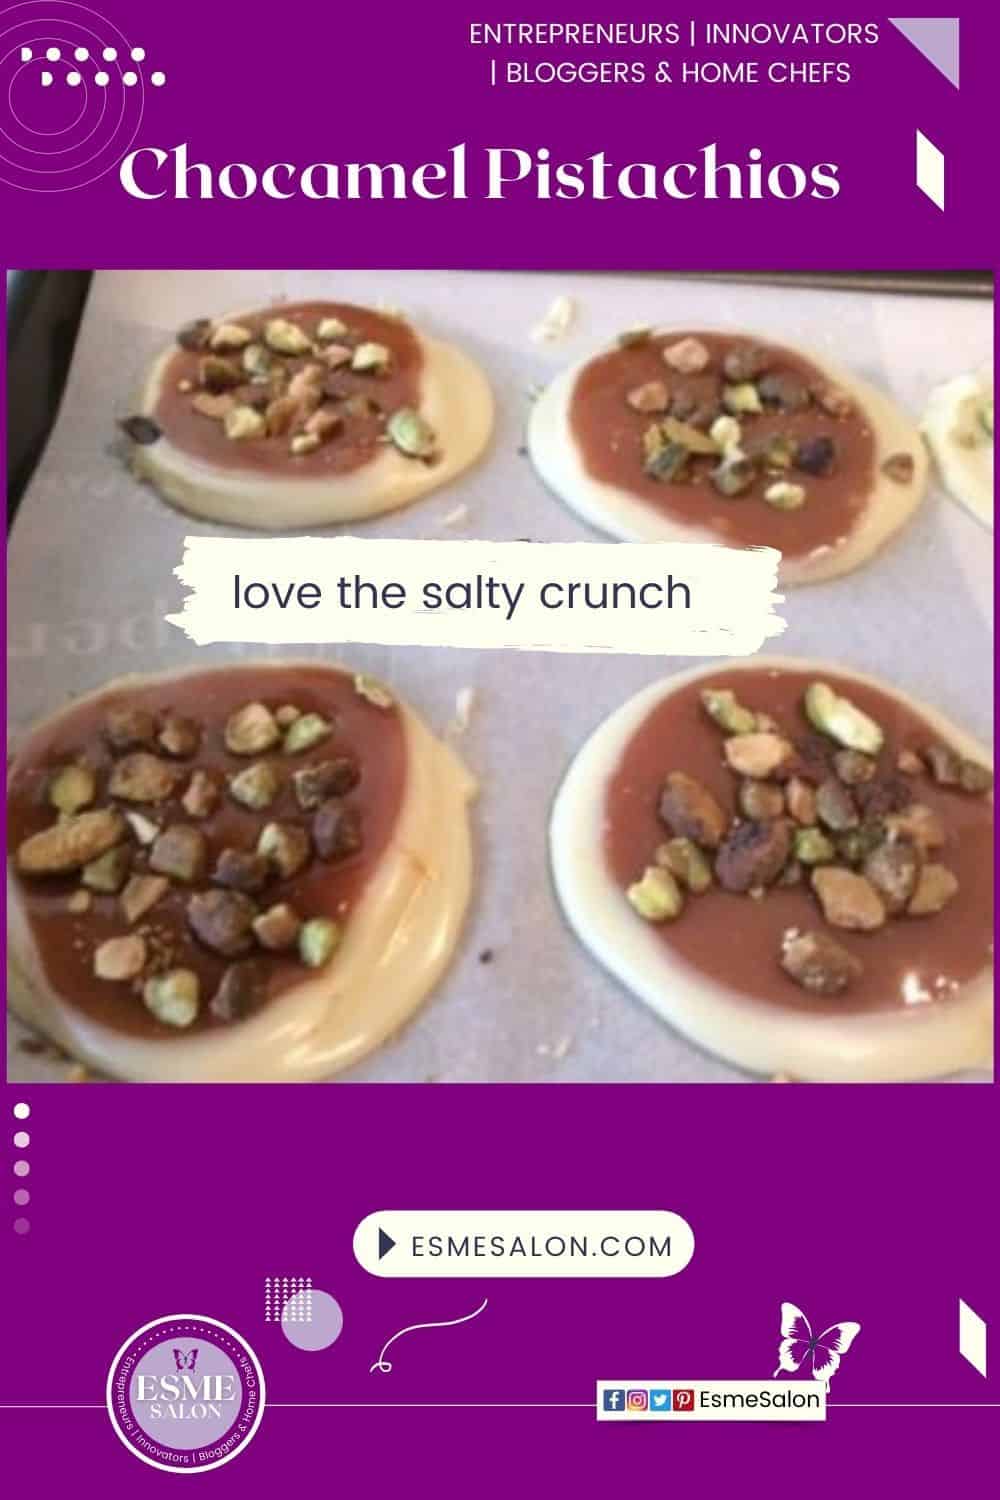 An image of 4 white chocolate circles topped with melted caramel and salty pistachios